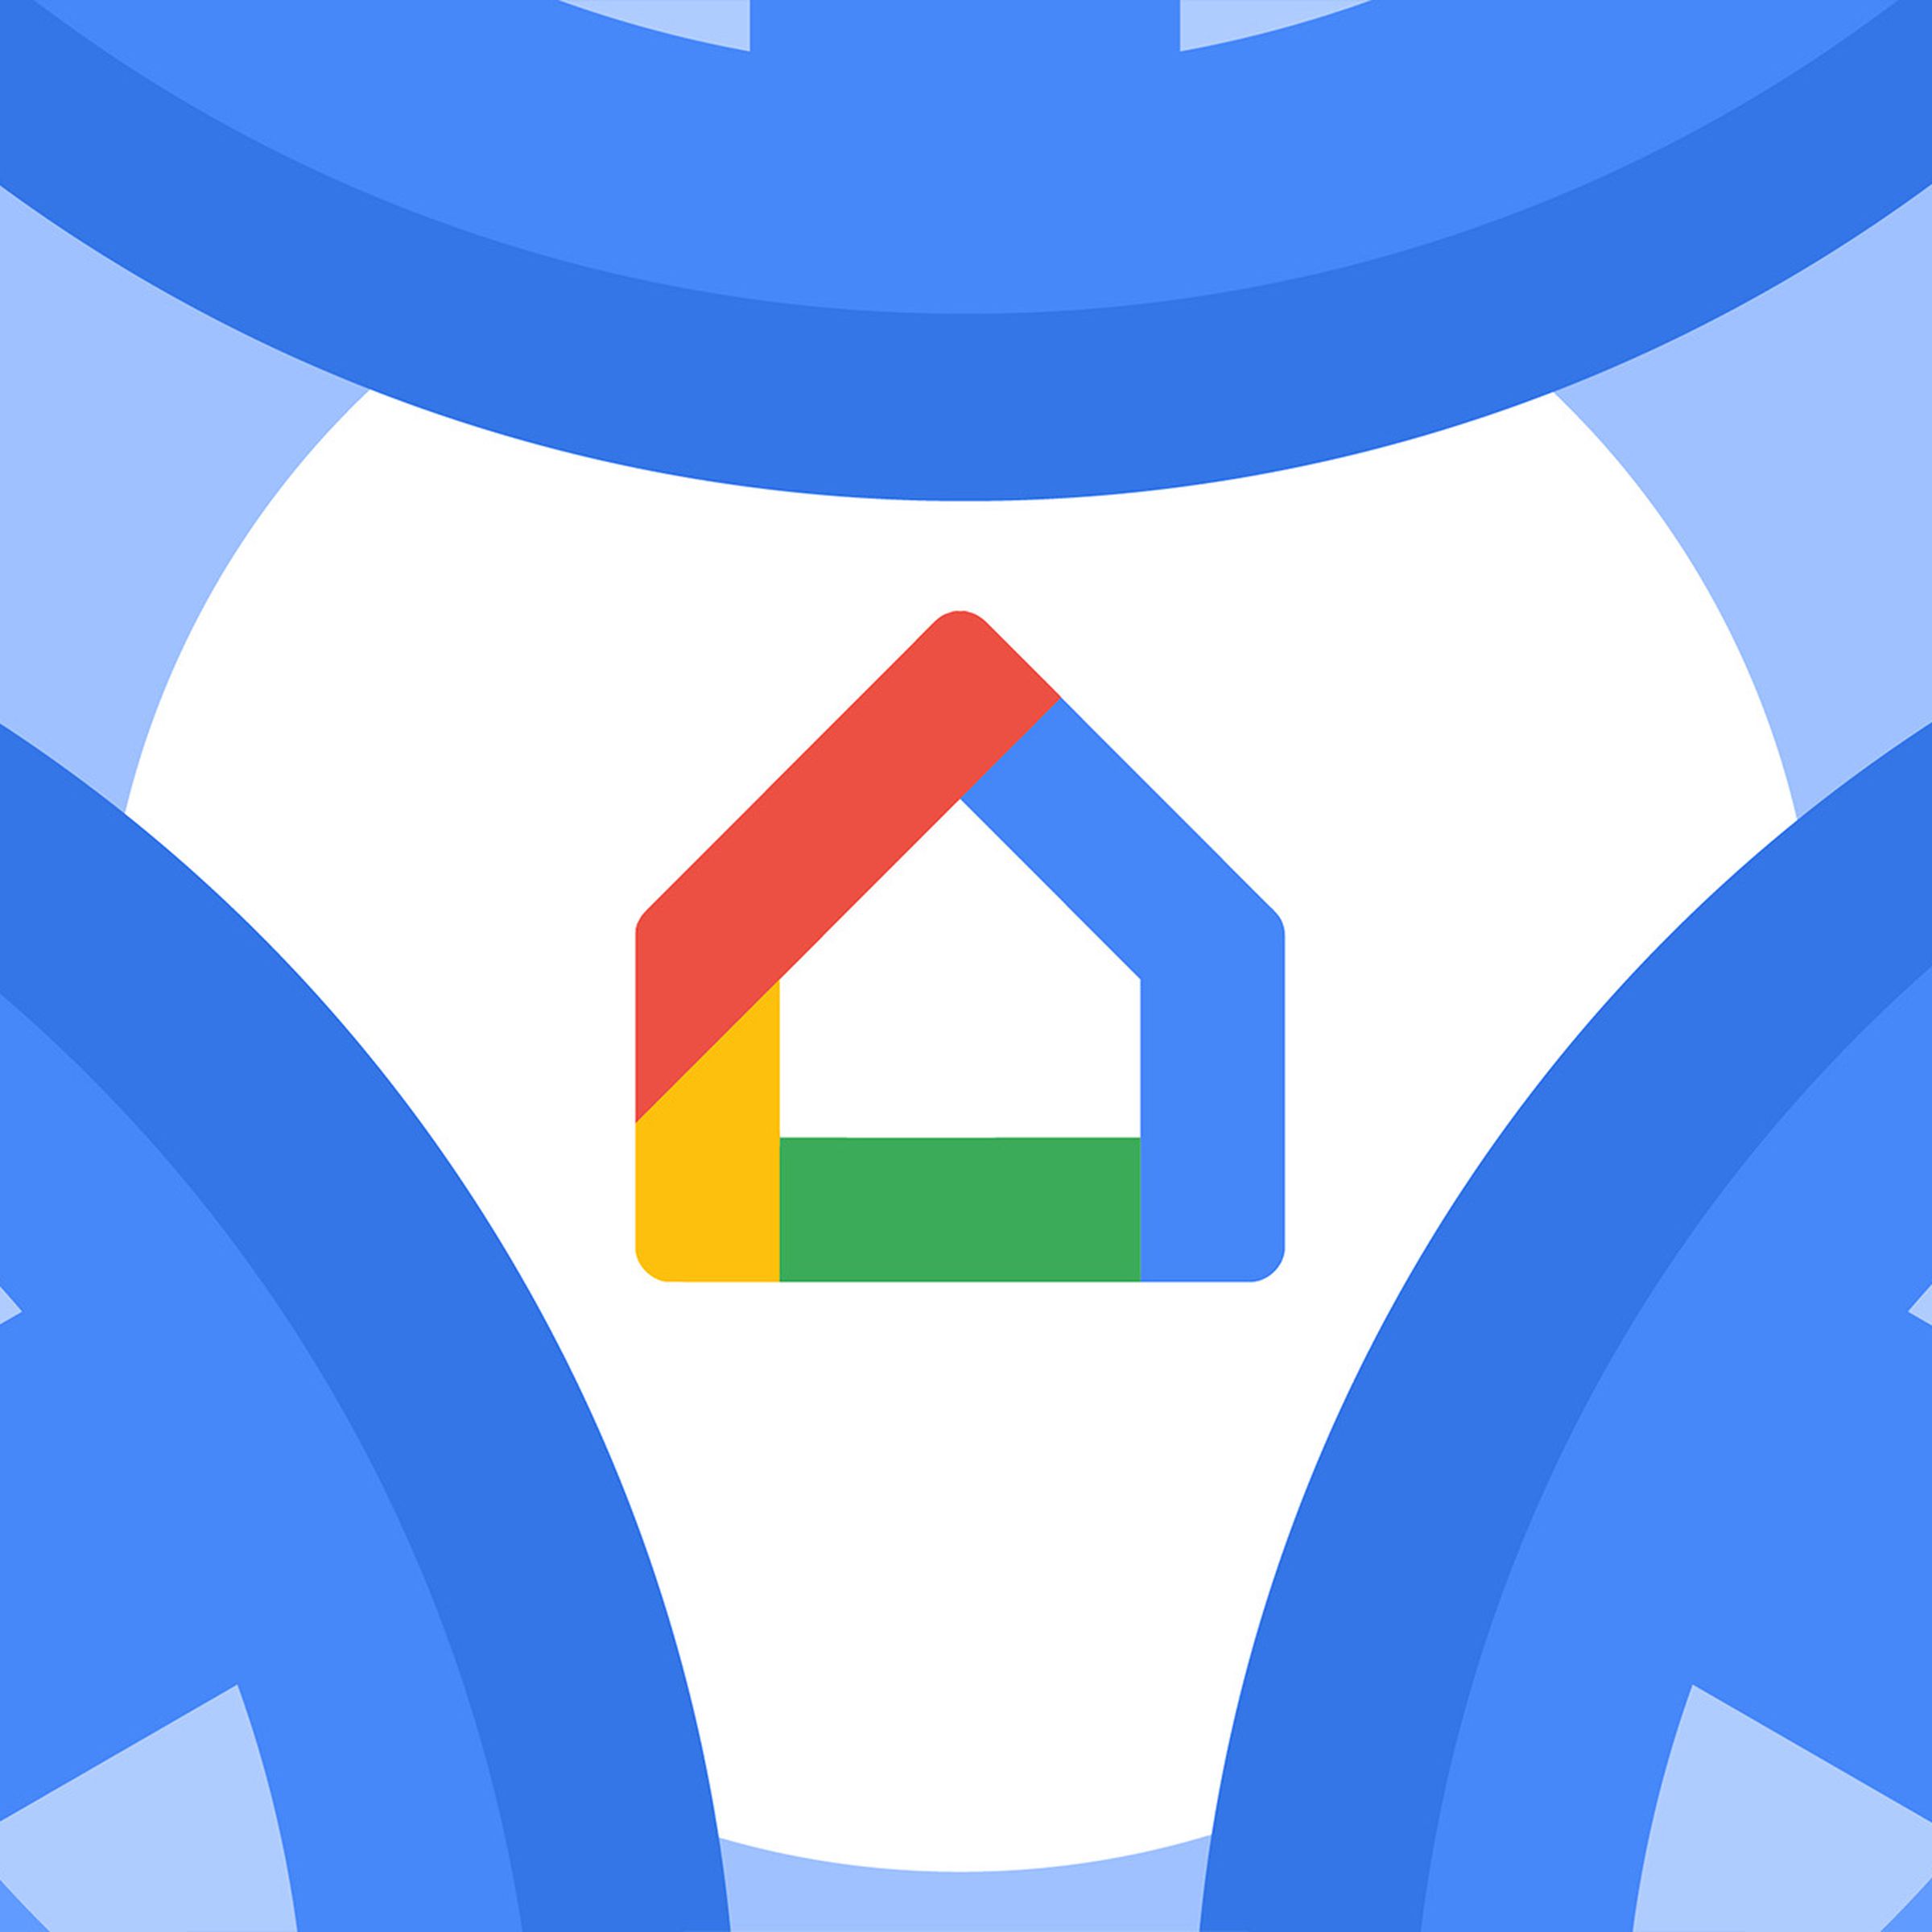 A Google Home logo on a blue and white illustration with the Matter logo.